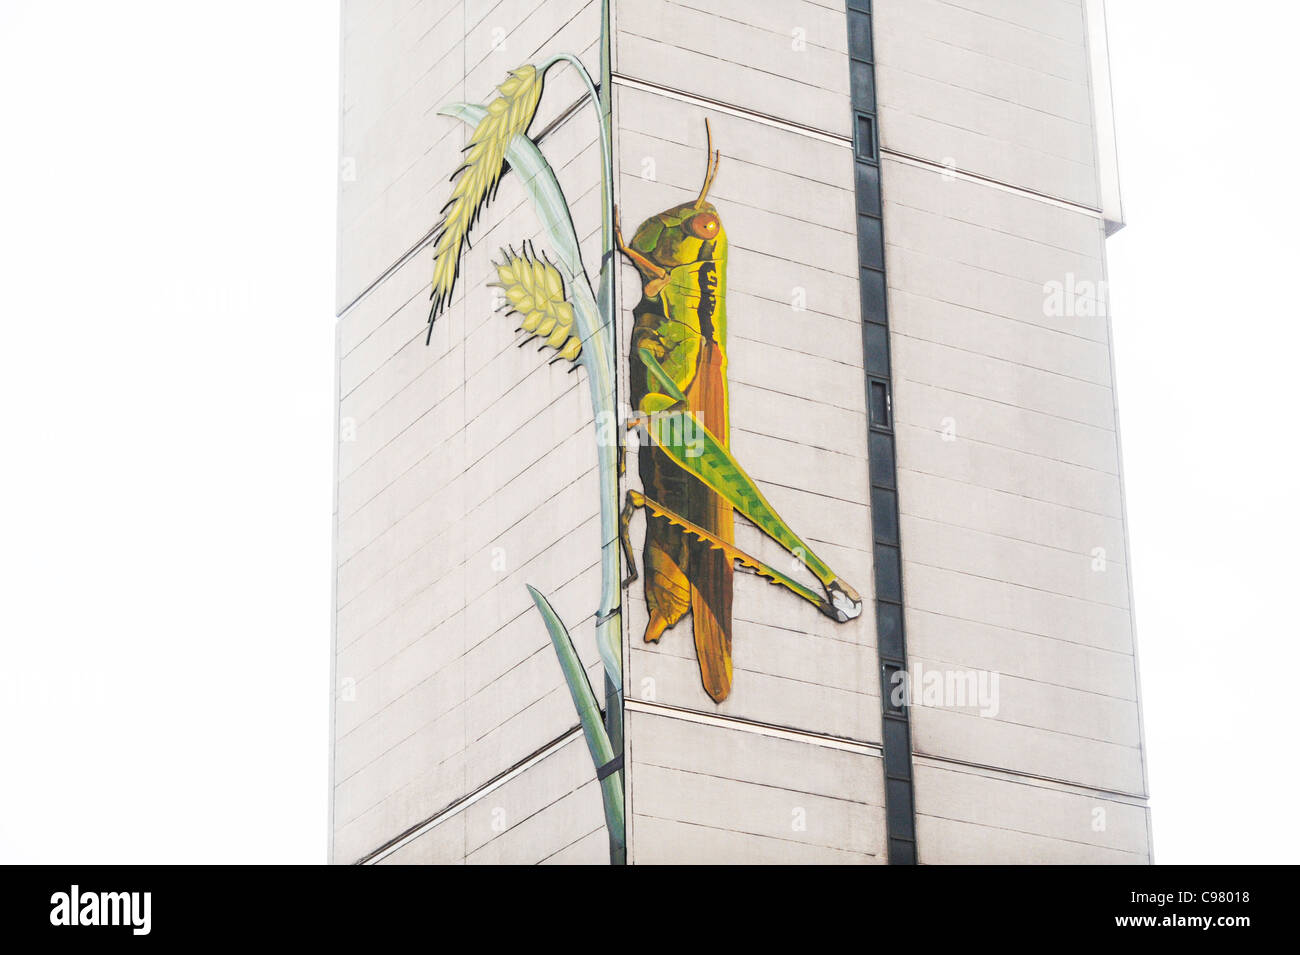 An insect artwork on a Building in Busan, South Korea. Stock Photo